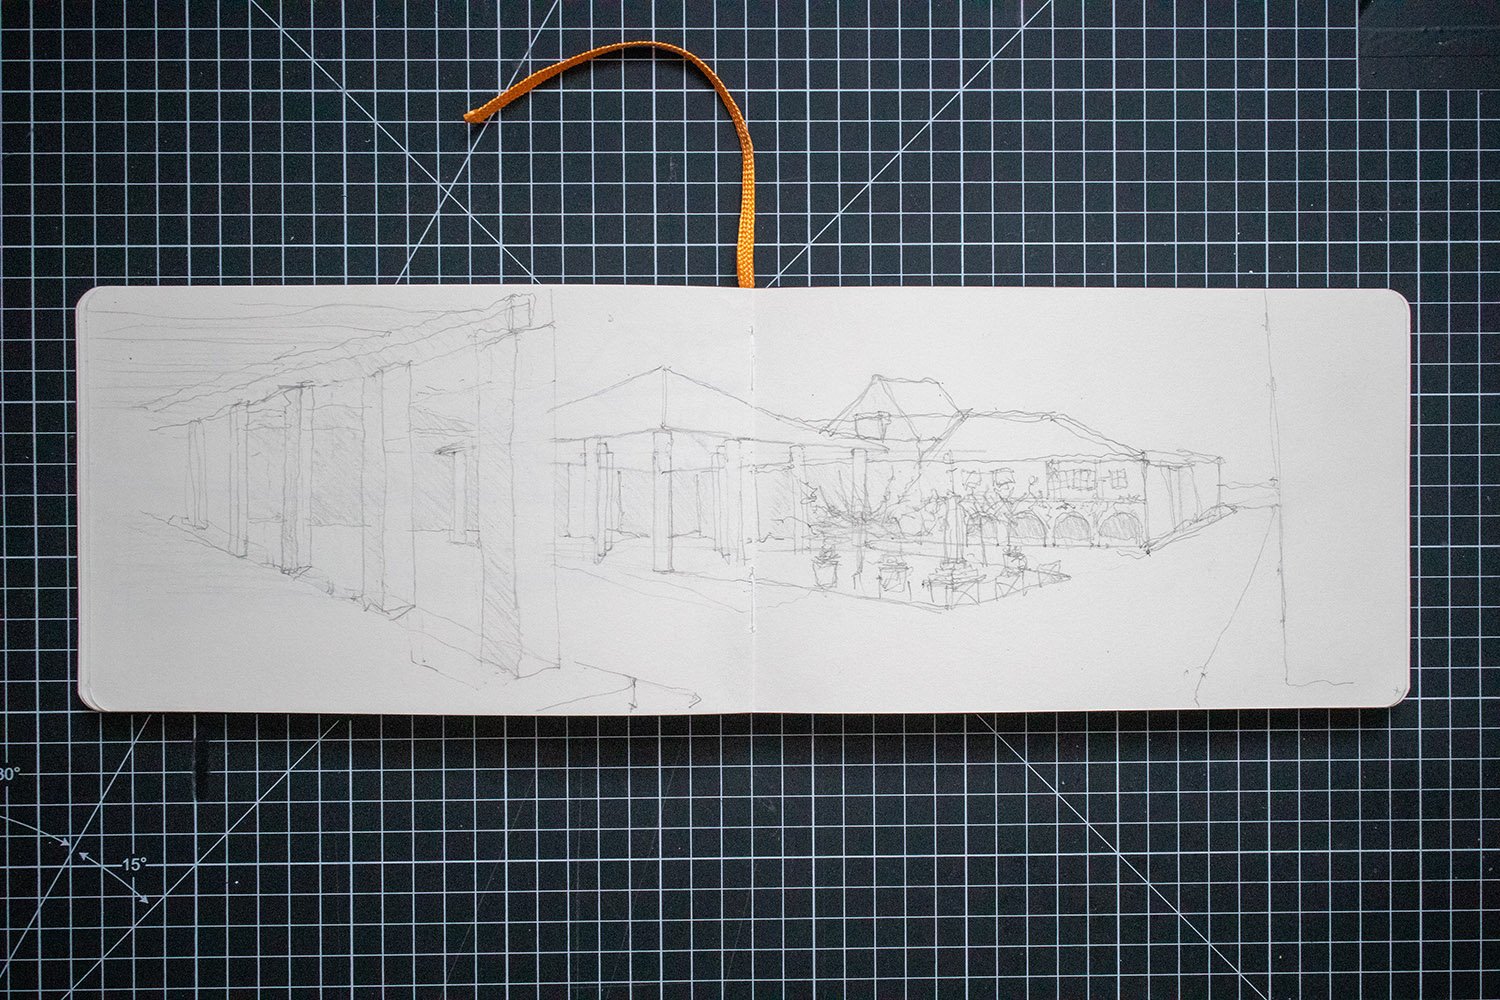 Here Are the Drawing Supplies to Sketch Architecture Like a Pro